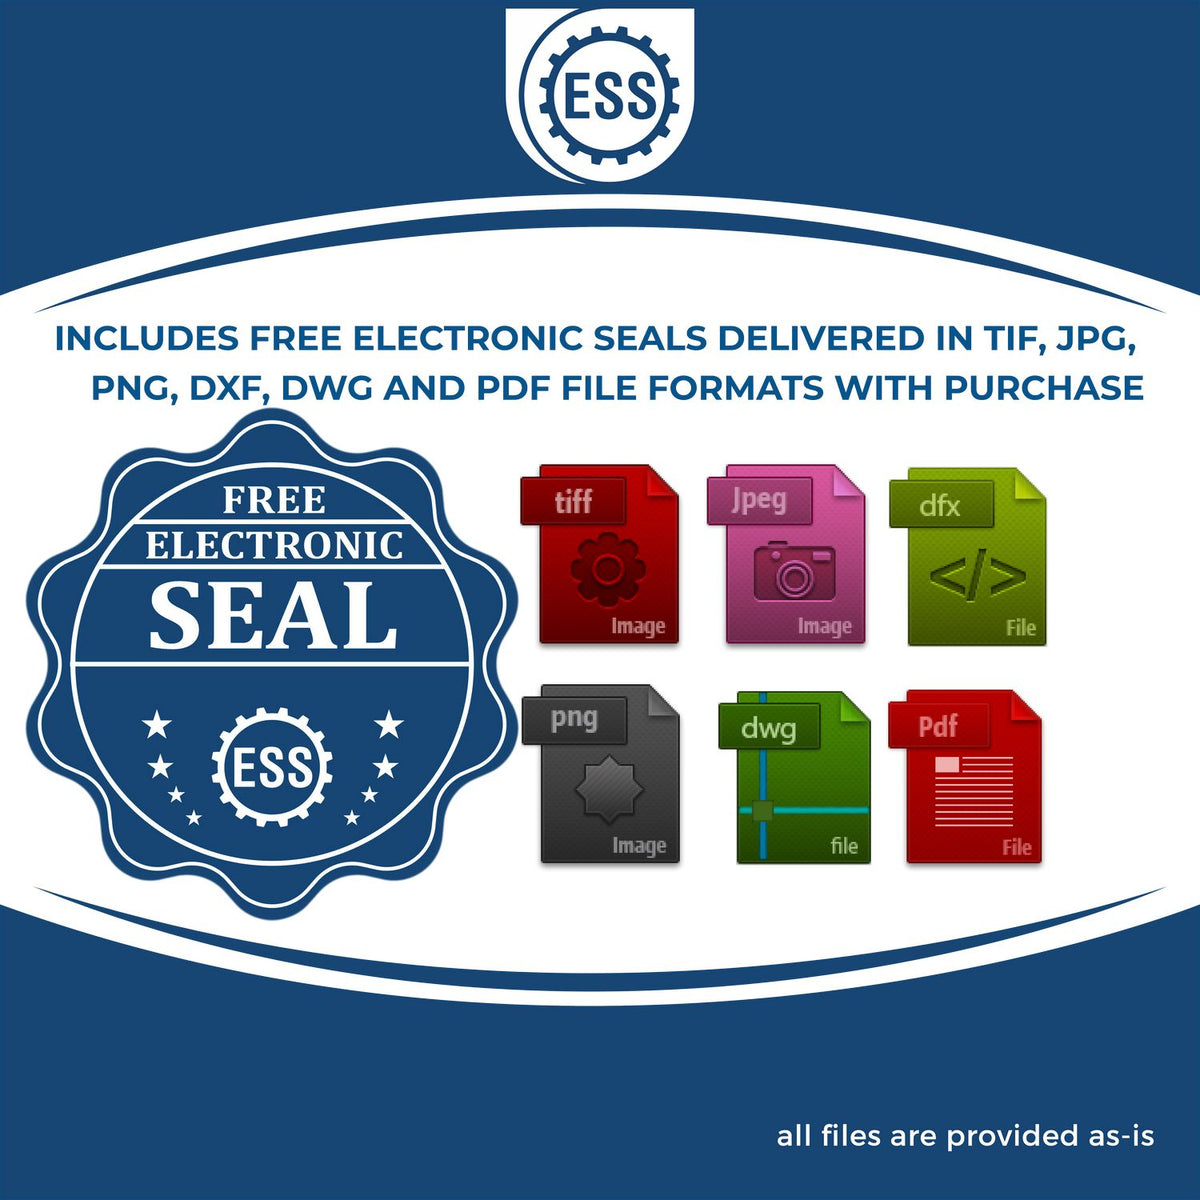 An infographic for the free electronic seal for the Gift Kansas Land Surveyor Seal illustrating the different file type icons such as DXF, DWG, TIF, JPG and PNG.